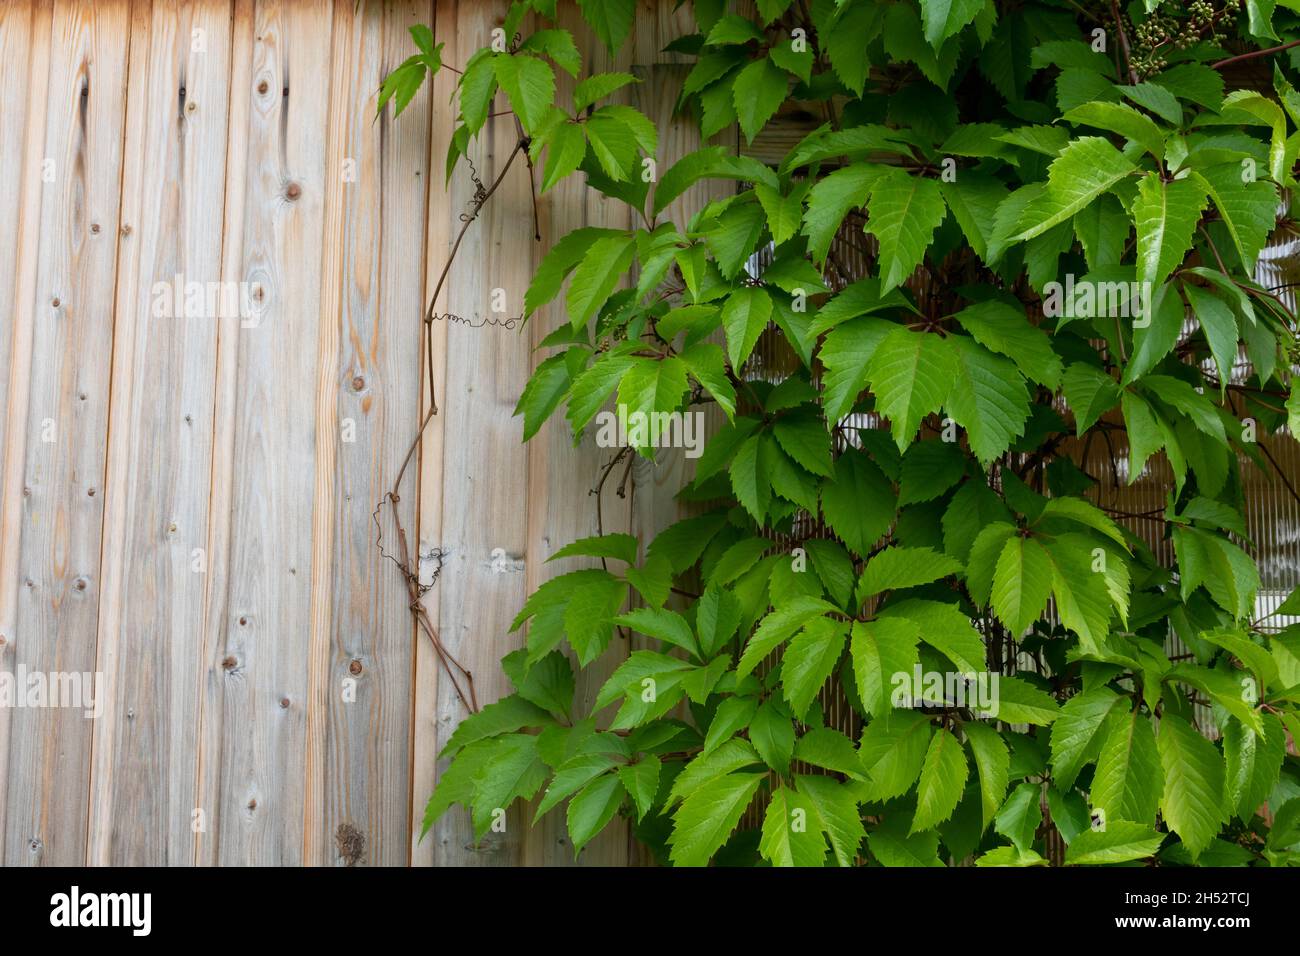 Natural background of girlish grapes. Green fence of parthenocissus henryana. Wild grapes, green foliage, background Stock Photo